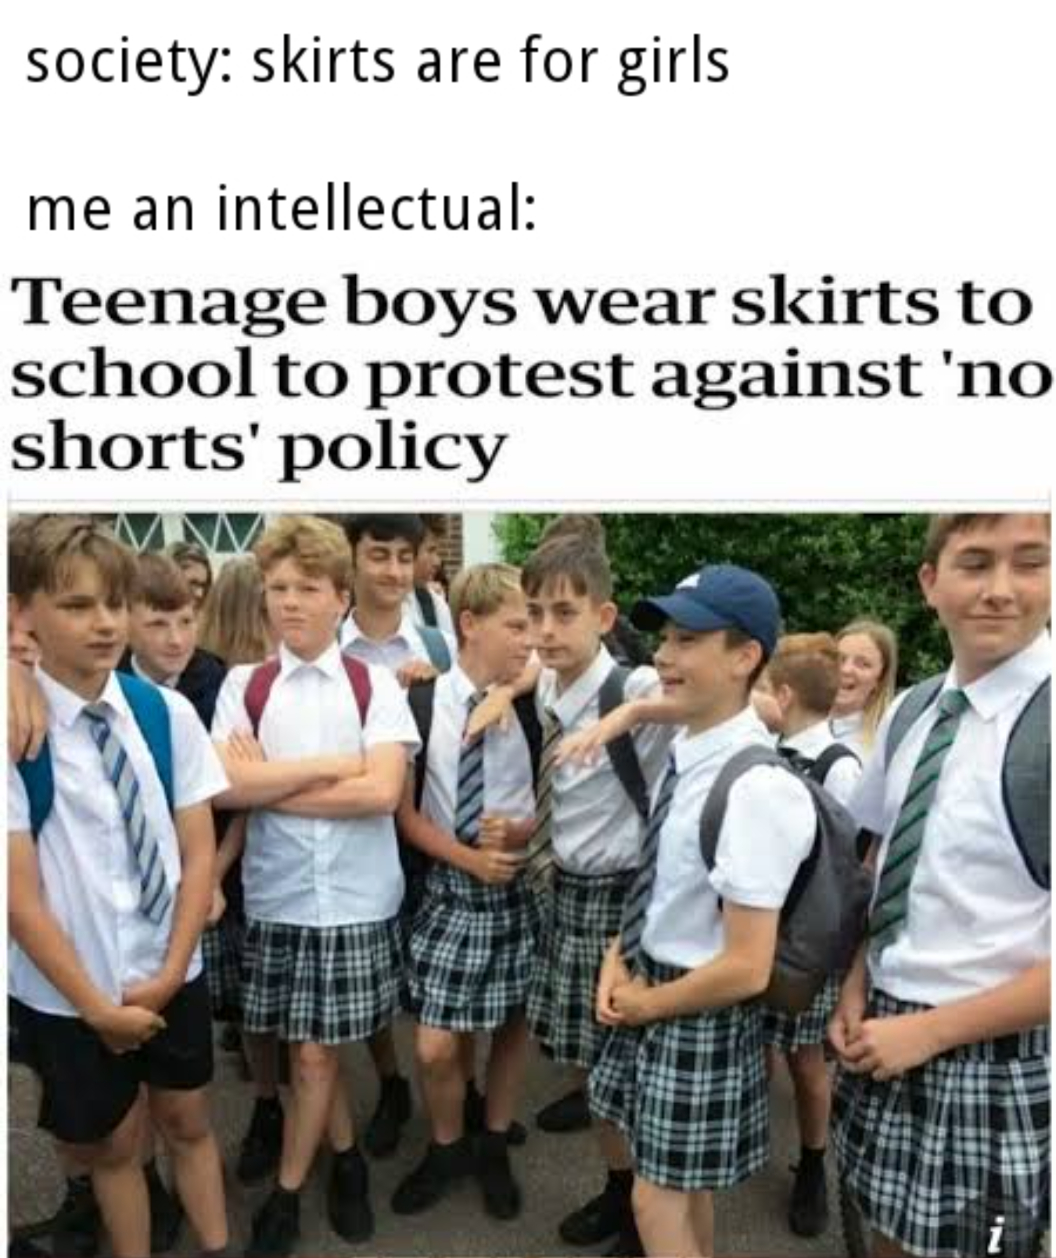 teen boys in skirts - society skirts are for girls me an intellectual Teenage boys wear skirts to school to protest against 'no shorts' policy